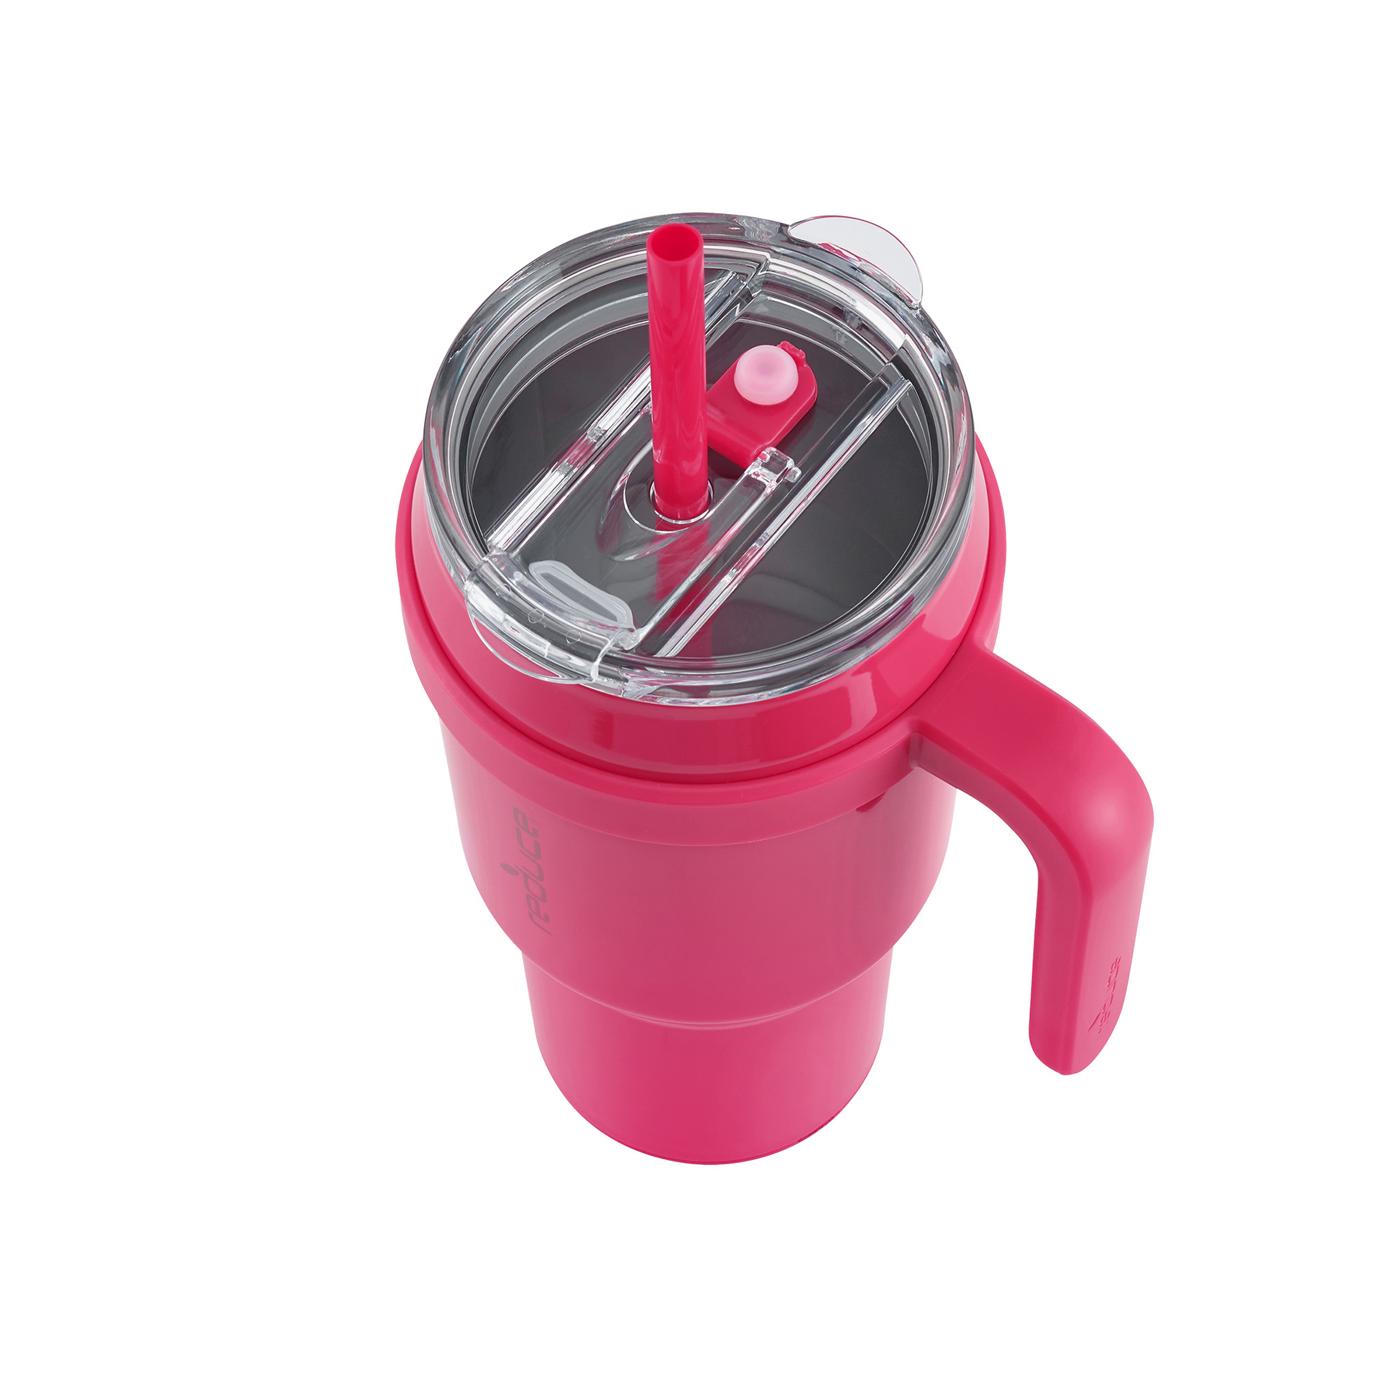 Reduce Cold1 Vacuum Insulated Stainless Steel Mug with Lid & Straw - Orchid  - Shop Travel & To-Go at H-E-B